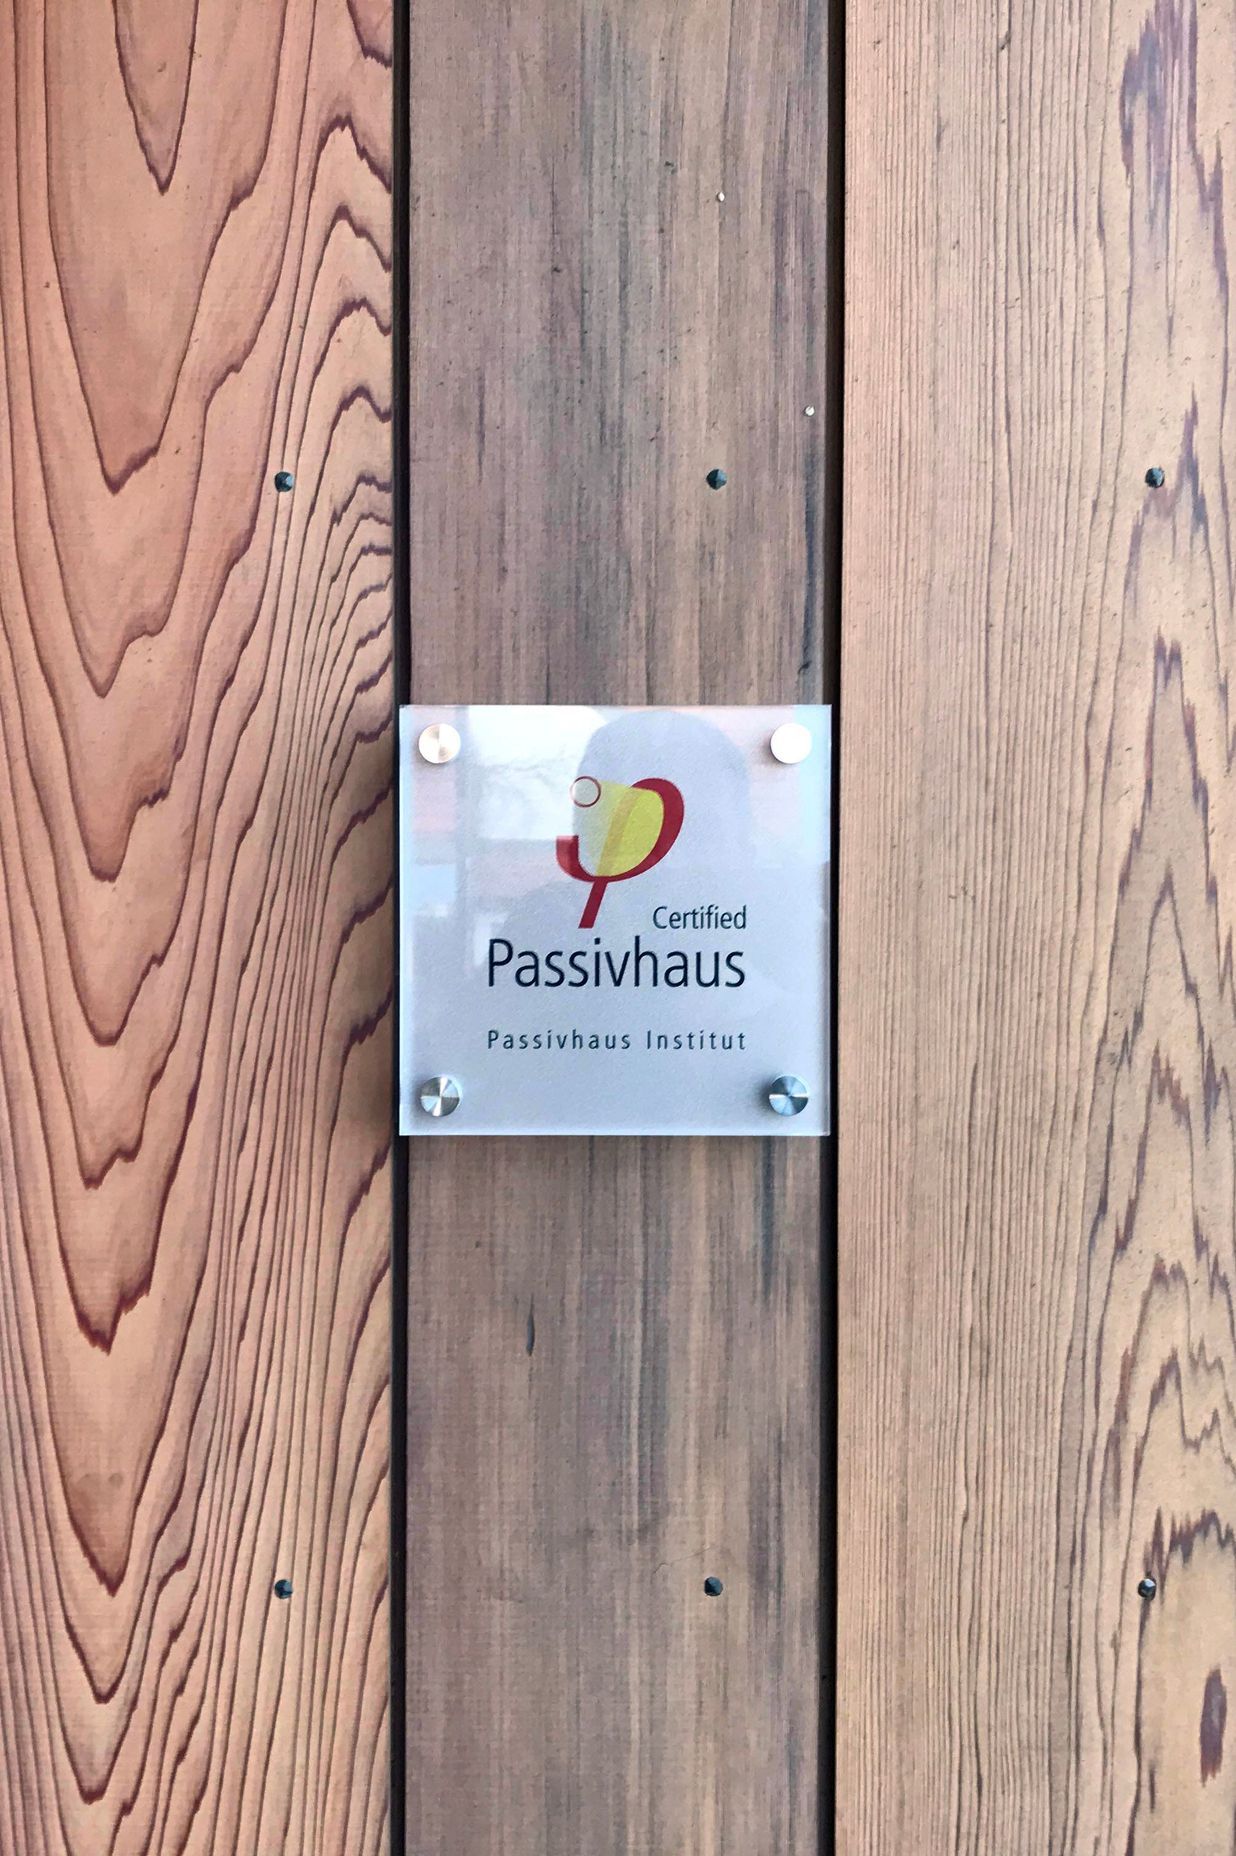 Certification plaque from Passivhaus, Germany.